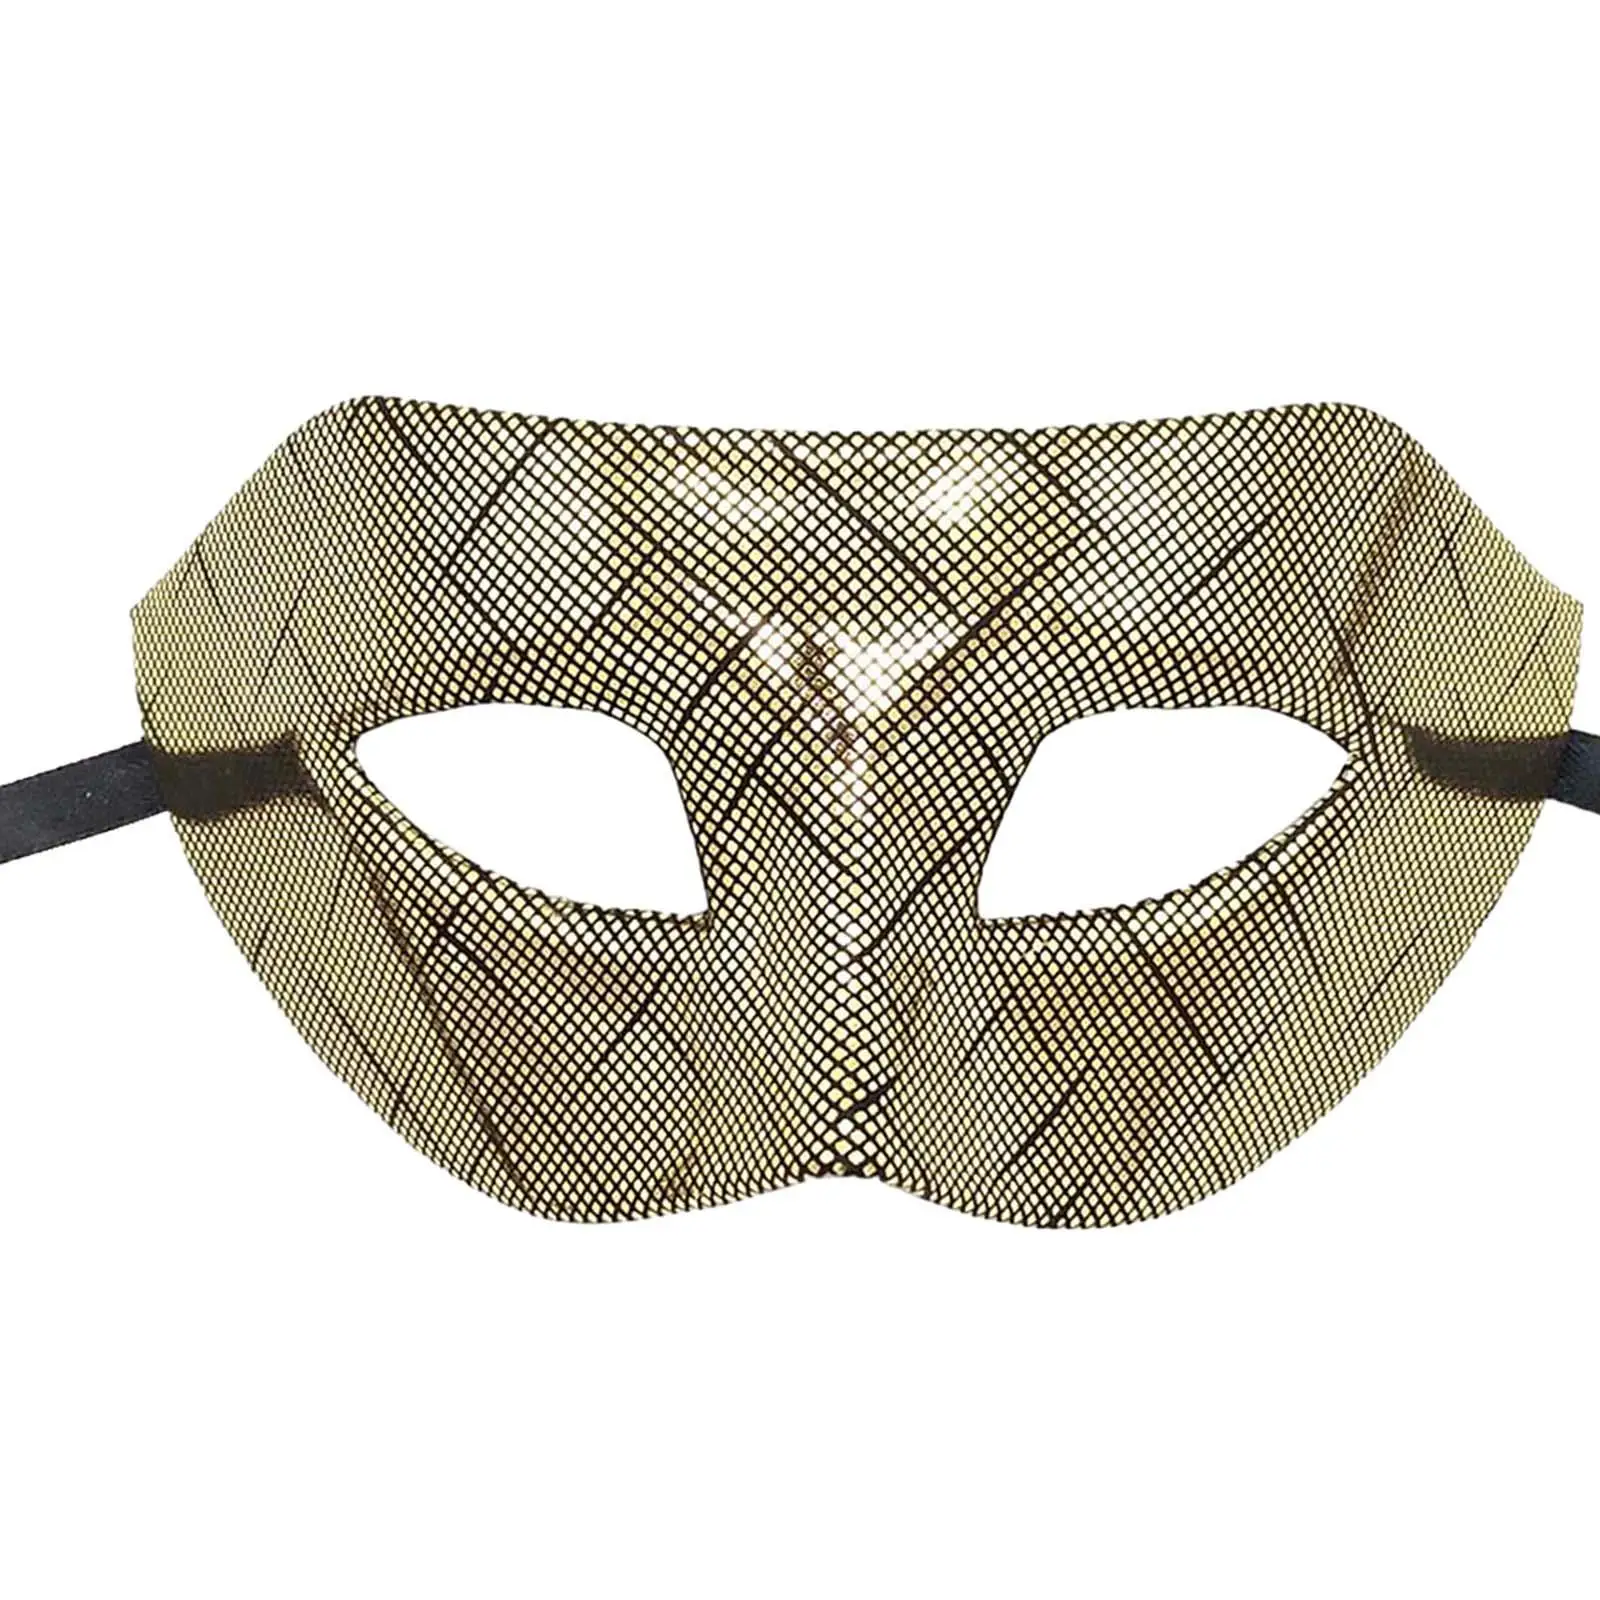 Masquerade Mask Decorative Half Face Mask for Holiday Dress up Halloween